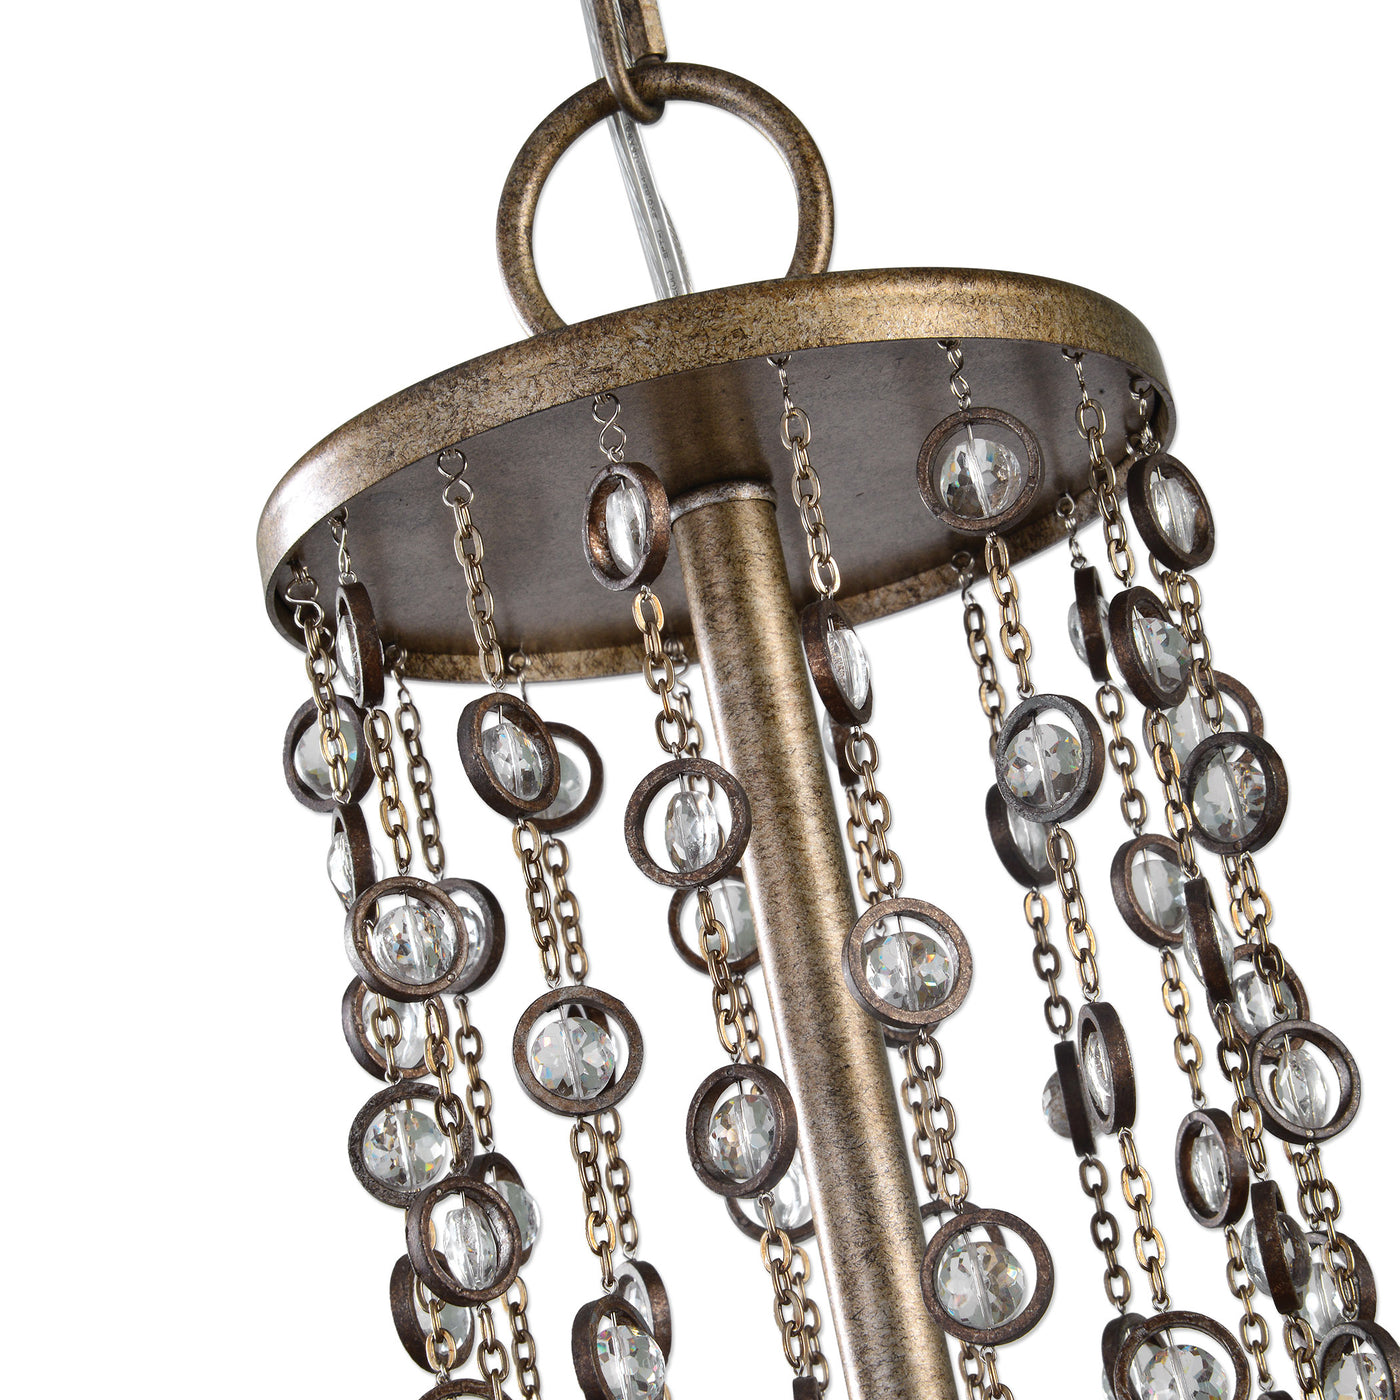 Refined 6 Lt. Tiered Chandelier In A Silver Swedish Iron Finish, Which Is A Silver Undercoat Then A Heavy Dark Bronze Anti...